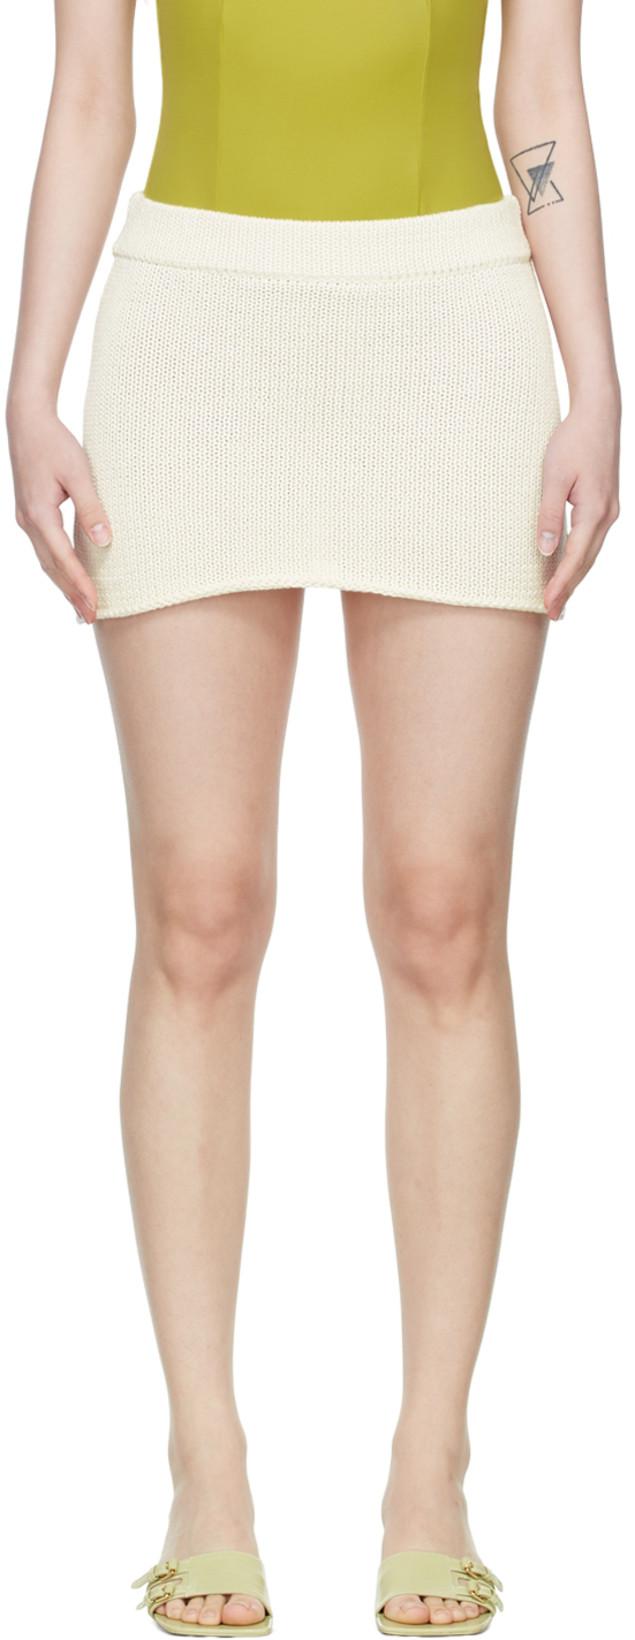 Off-White Cotton Mini Skirt by BELLE THE LABEL